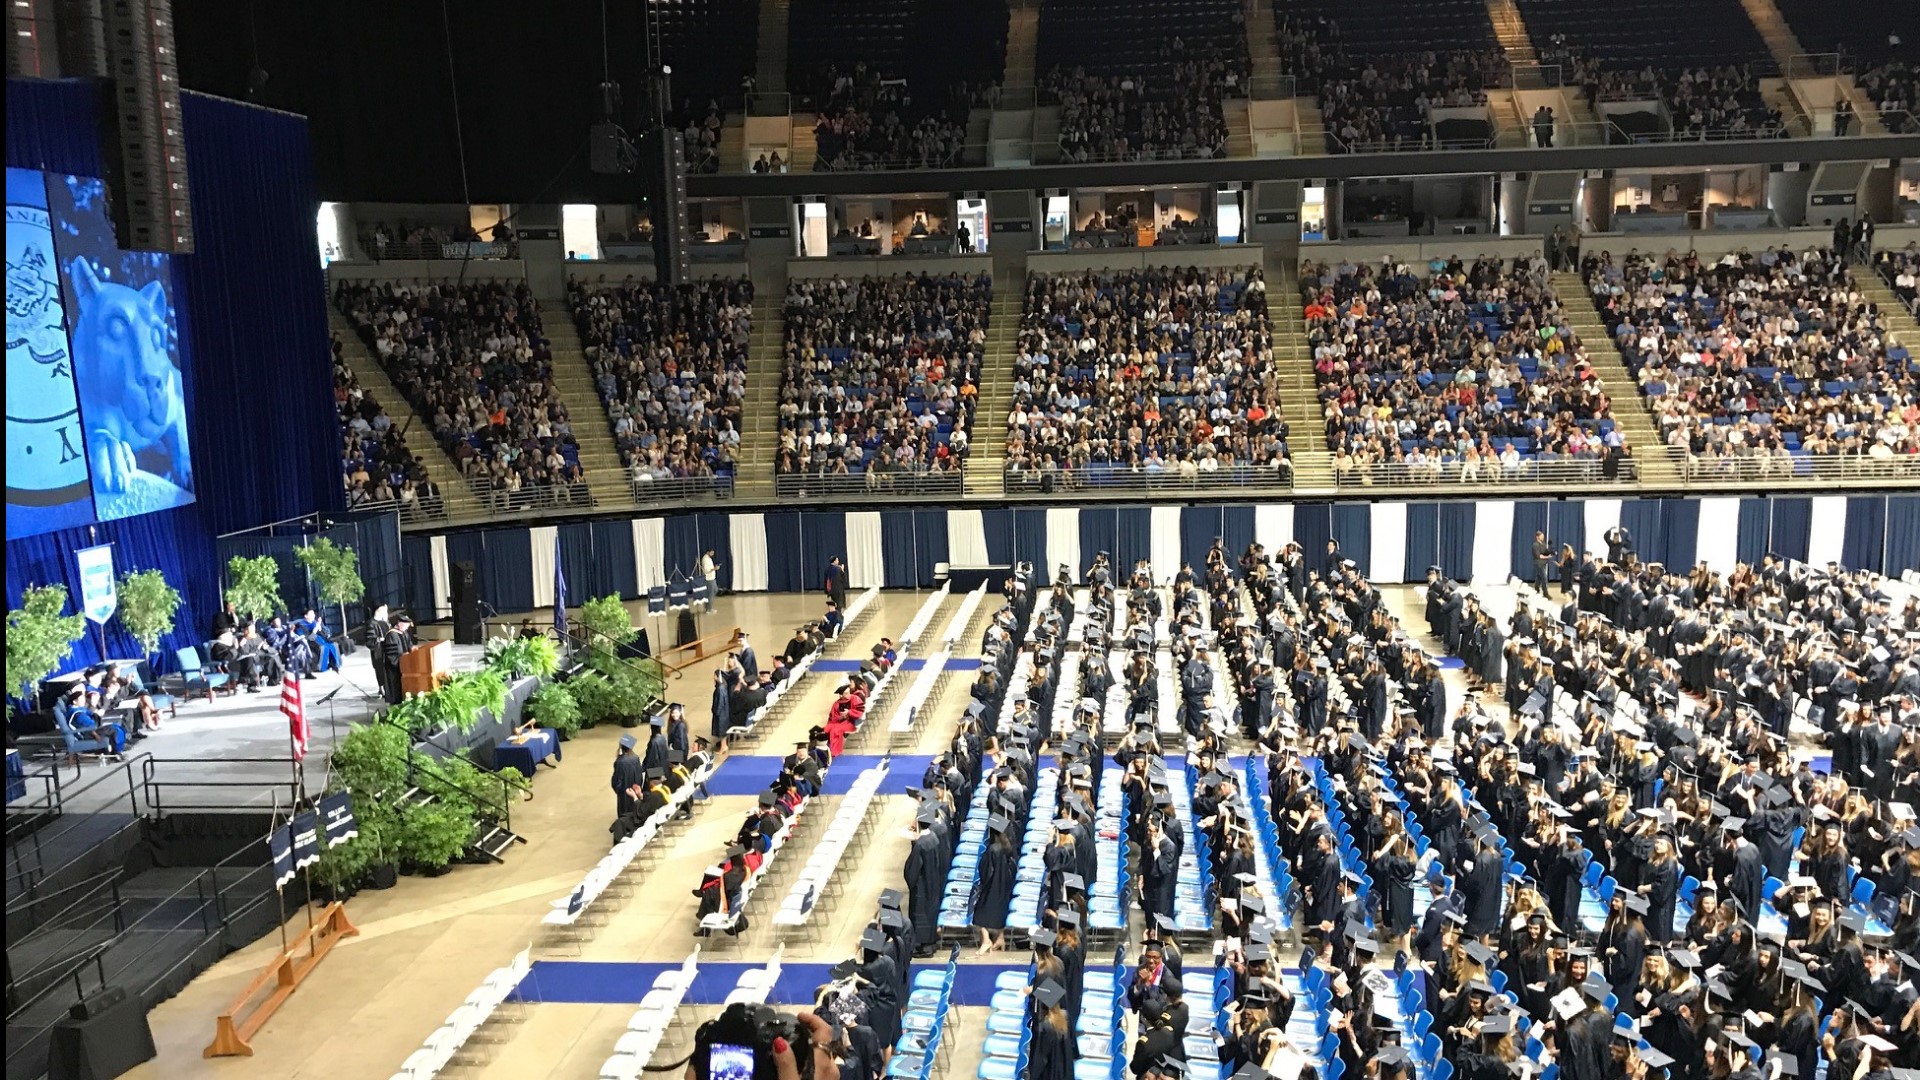 Commencement ceremonies will take place in Beaver Stadium during the originally scheduled spring 2021 commencement weekend from May 7 to May 9.